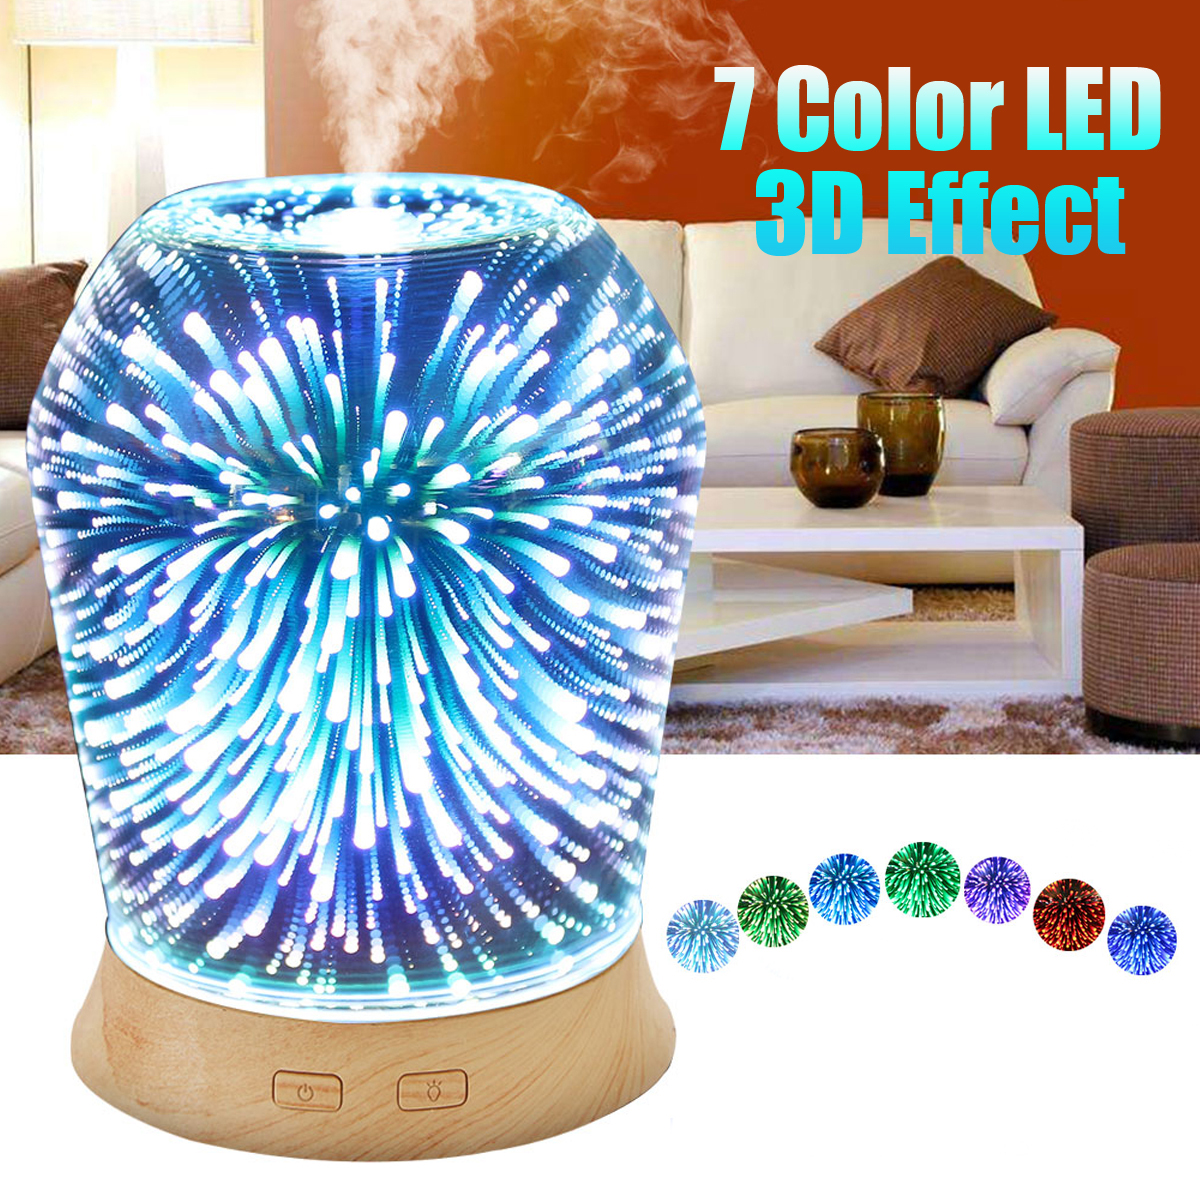 3D-LED-Ultrasonic-Diffuser-Humidifier-Aromatherapy-Essential-Oil-Diffuser-Mist-Humidifier-1421490-1